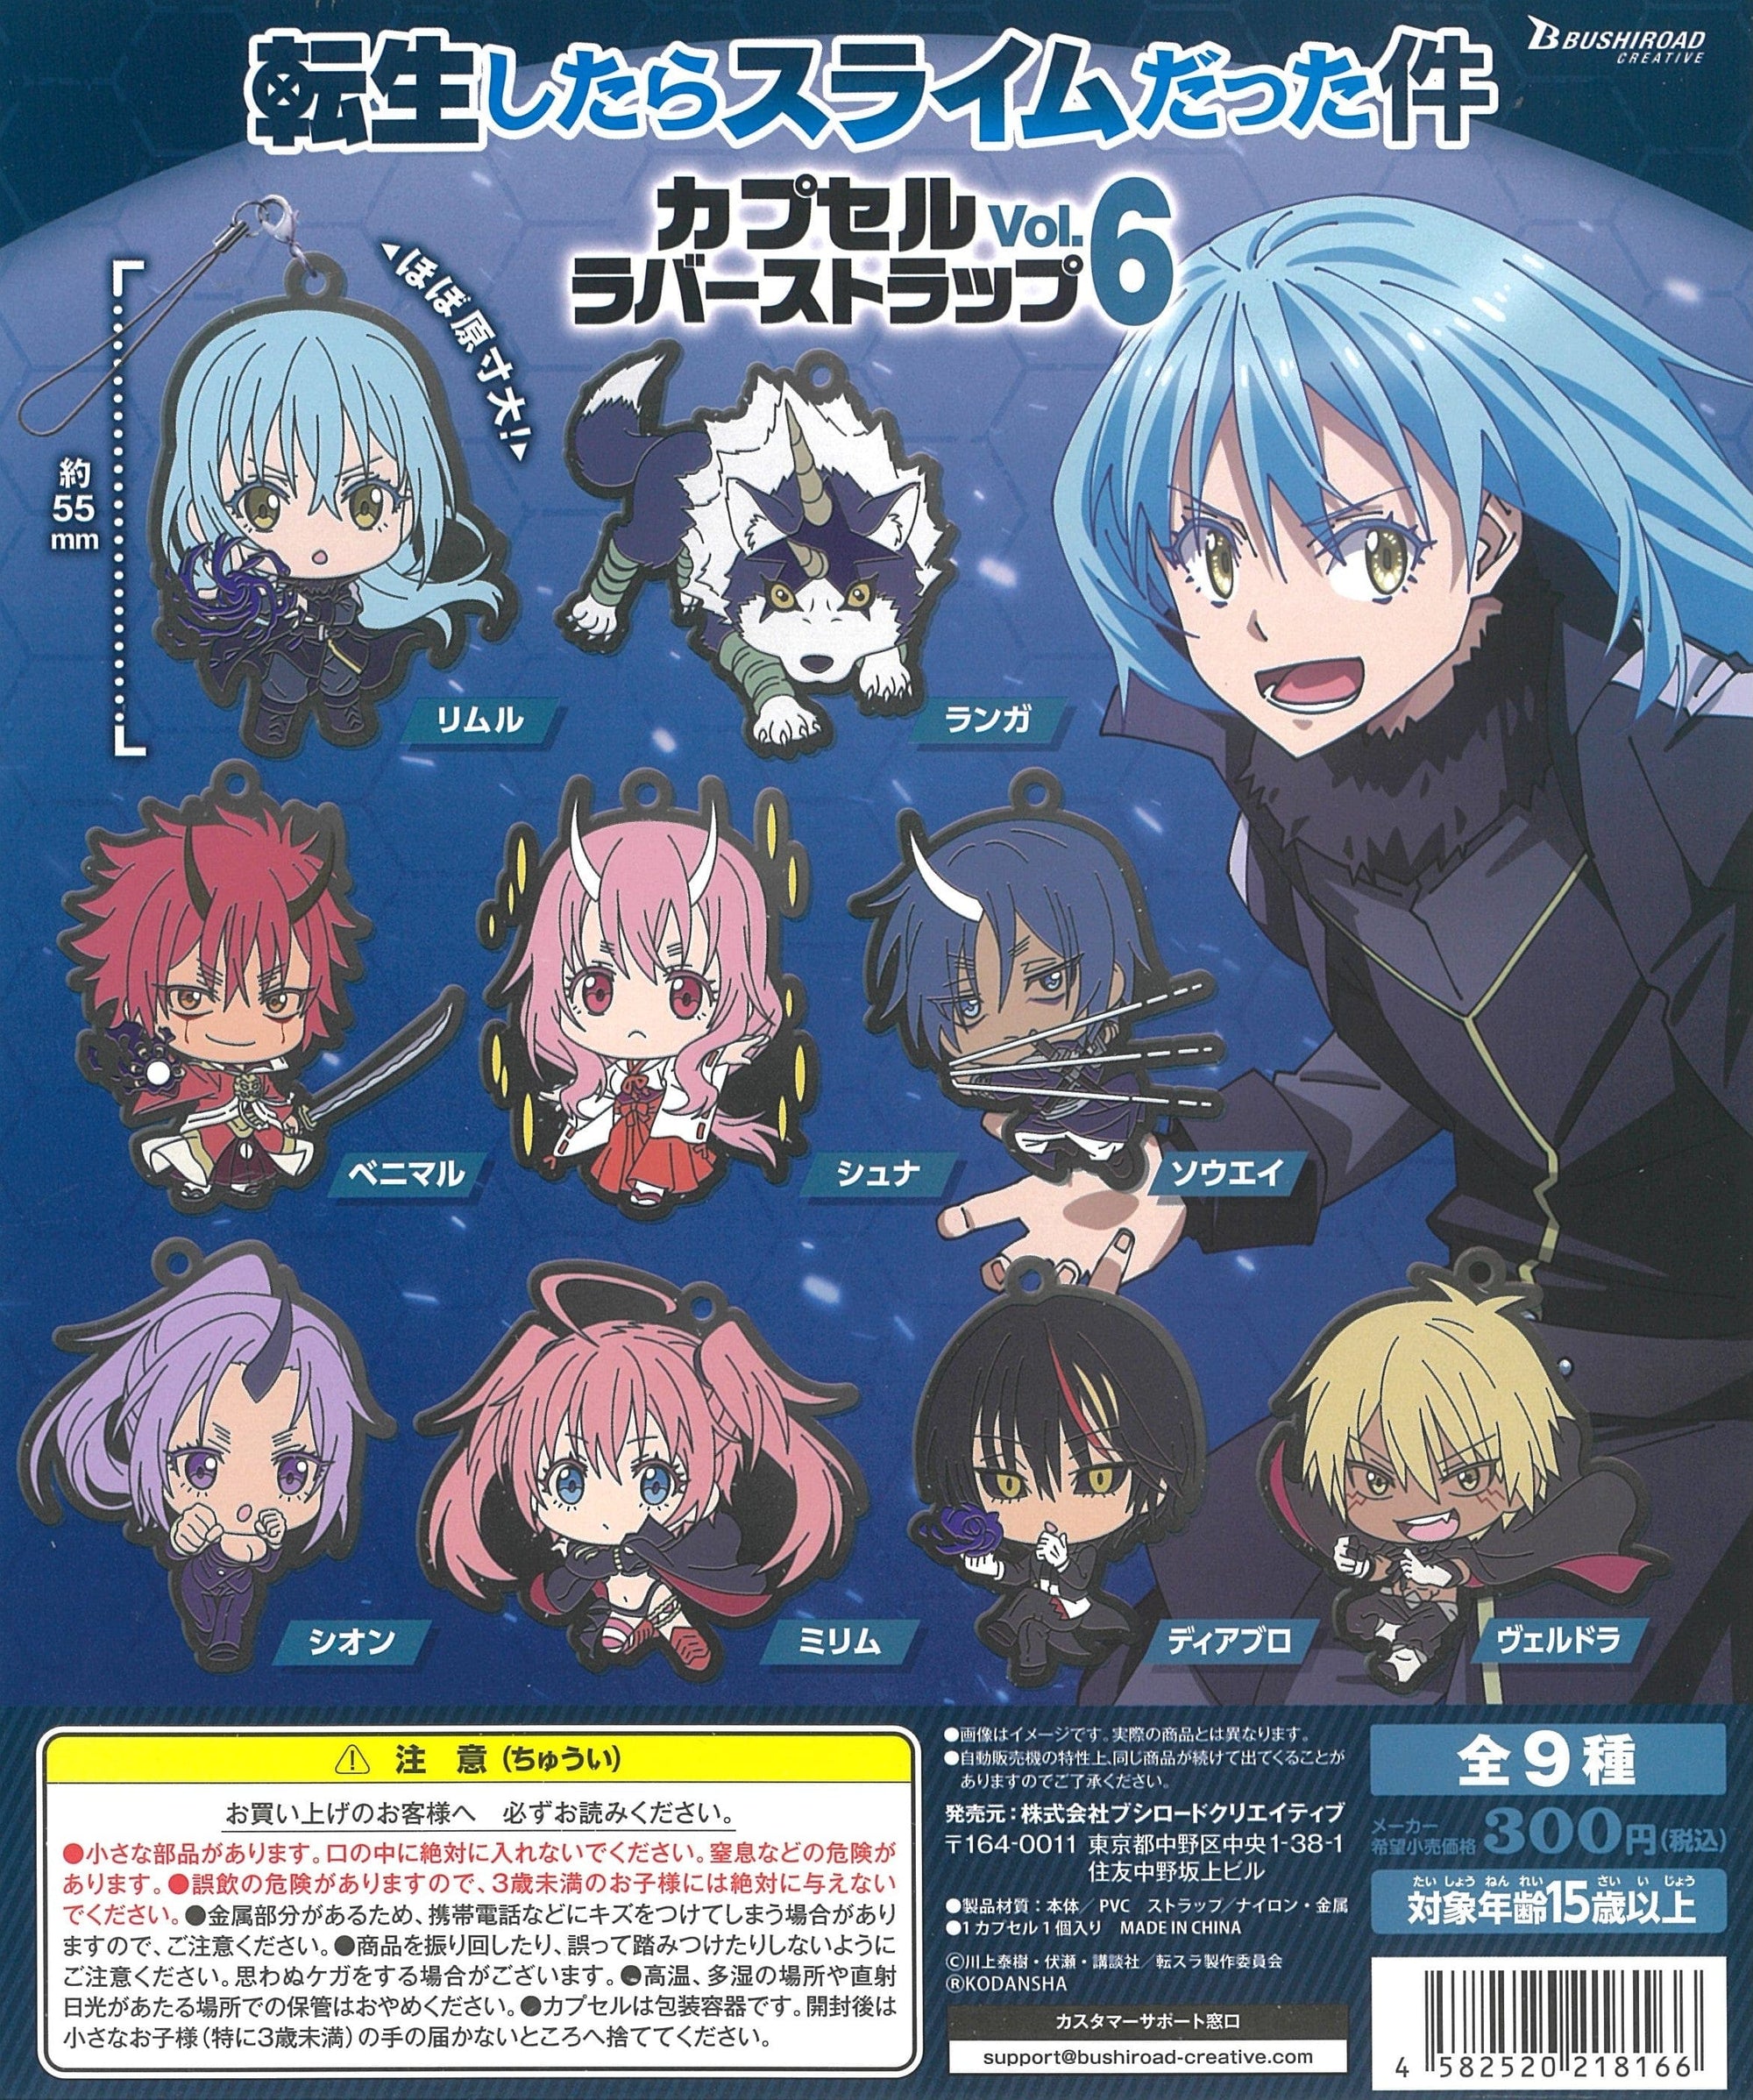 Bushiroad Creative CP1762 That Time I Got Reincarnated as a Slime Capsule Rubber Strap Vol 6